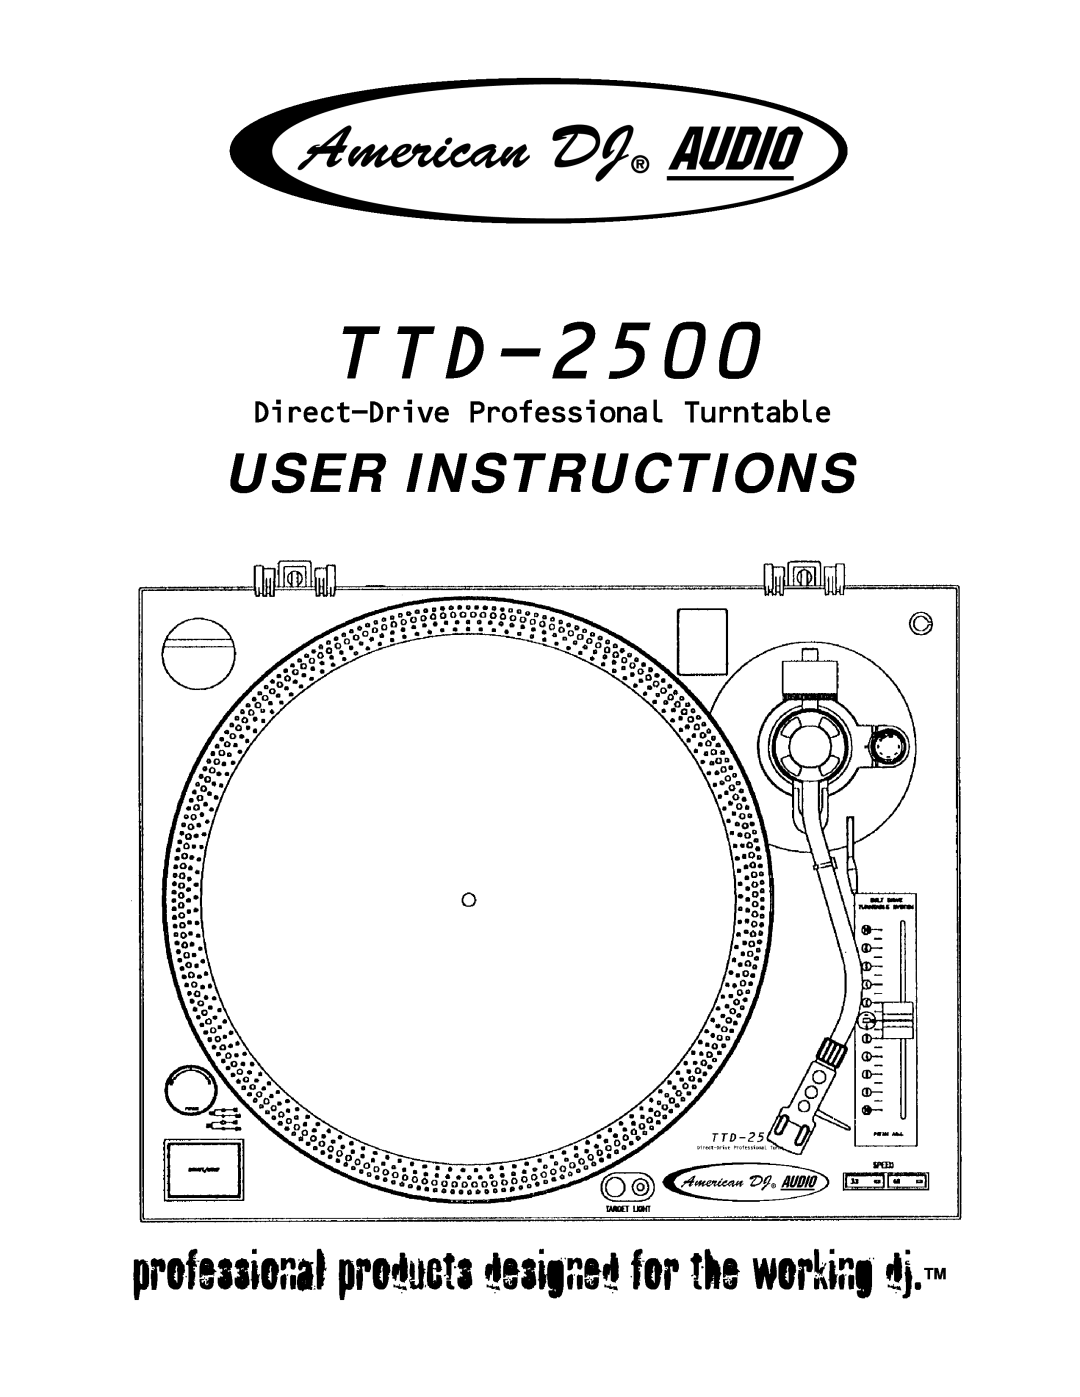 American Audio TTD-2500 manual User Instructions, professional products designed for the working dj 